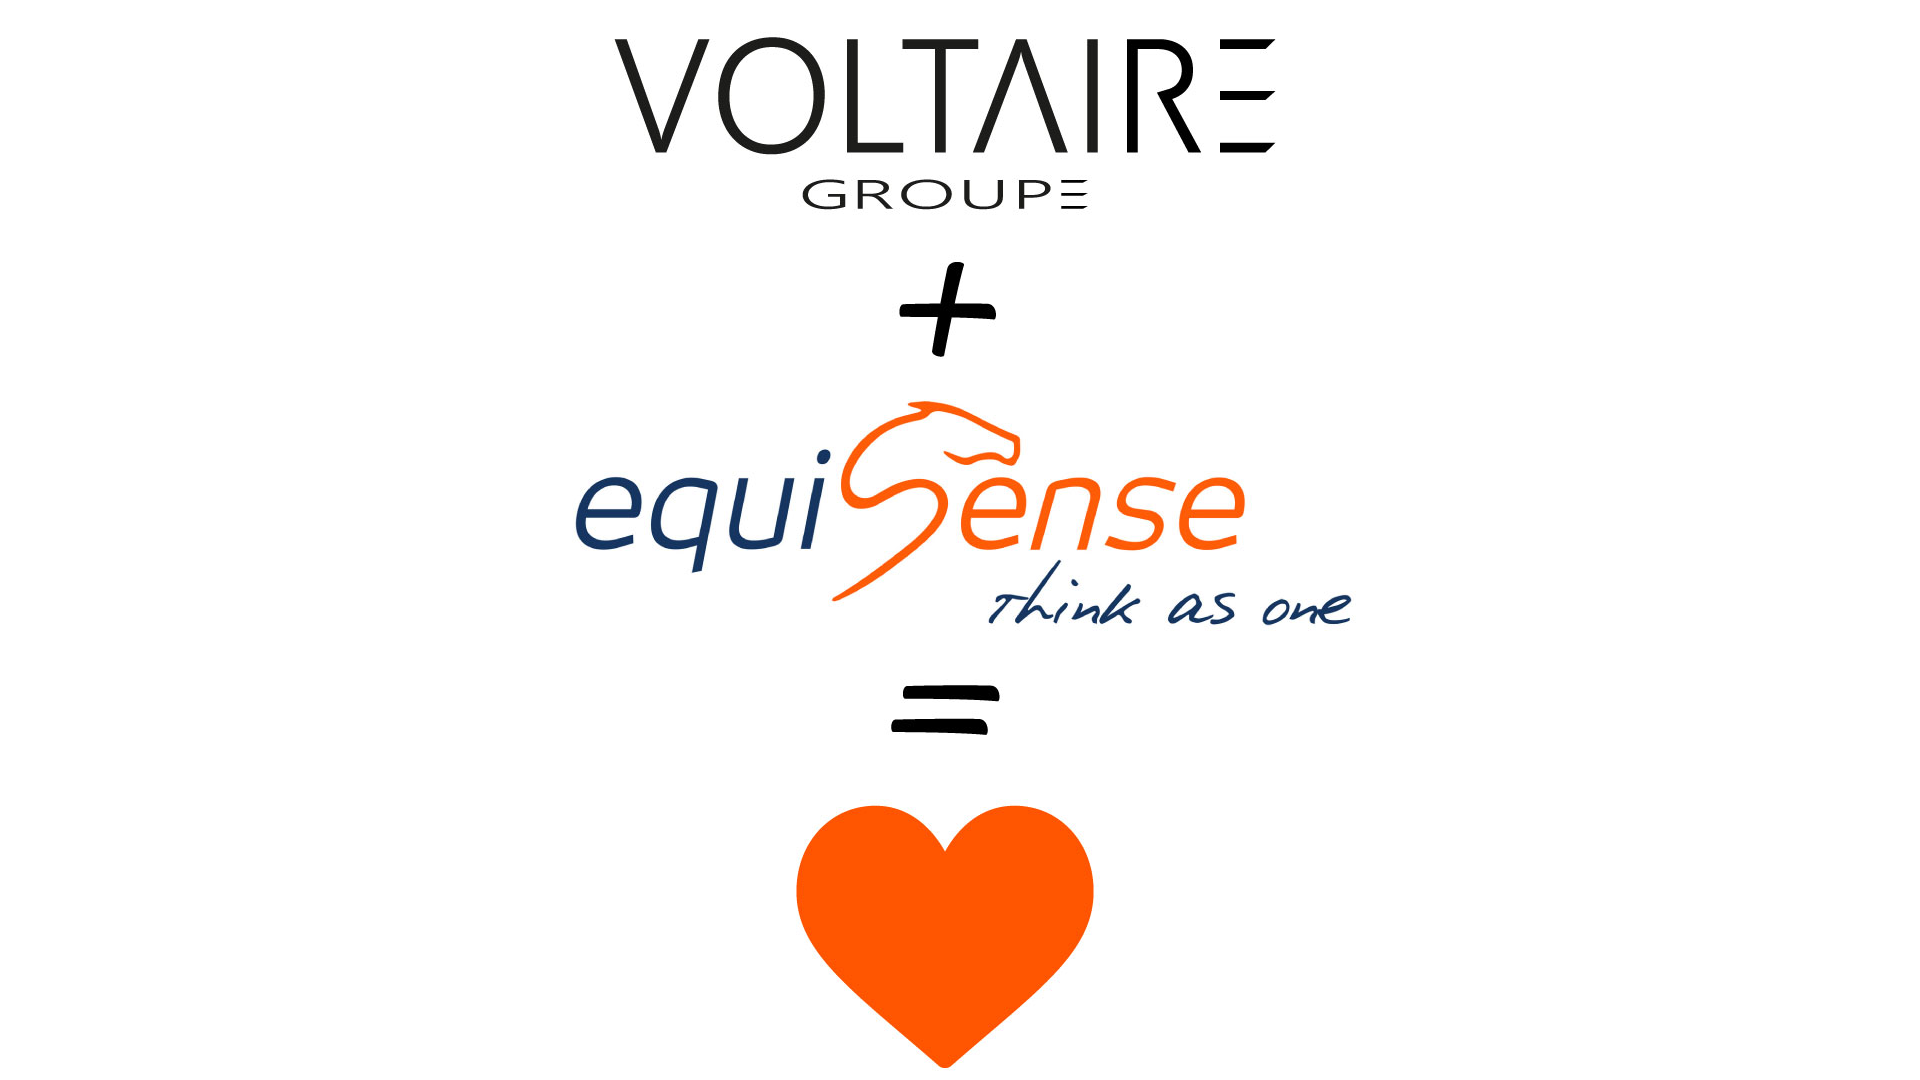 Equisense join the Voltaire family - photo